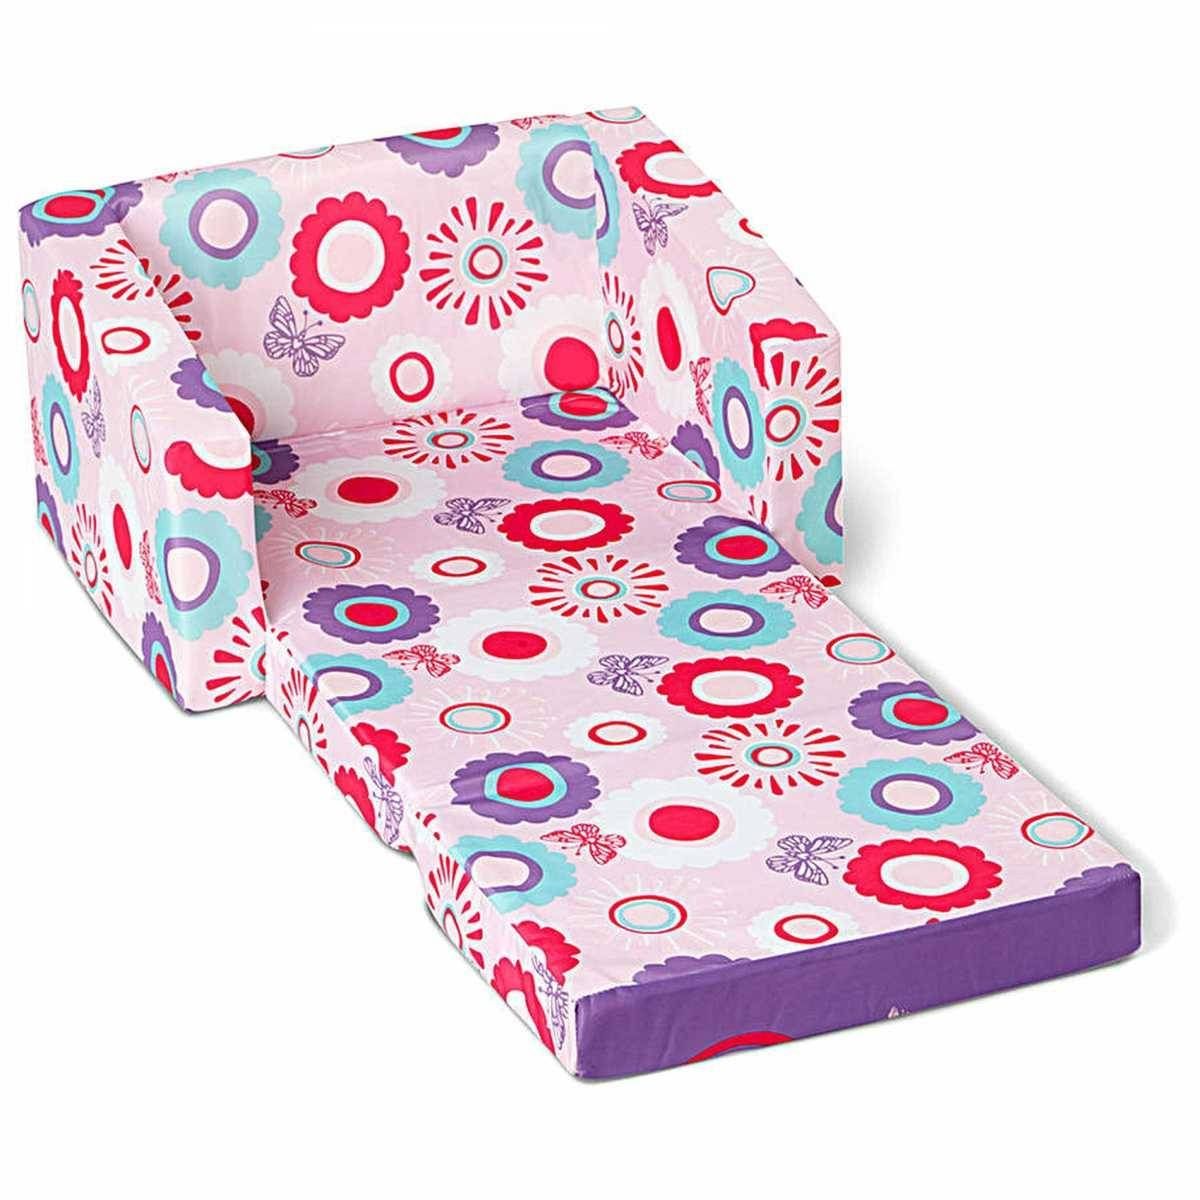 Fascinating Kids Sofa For Your Loved One – Darbylanefurniture Regarding Flip Open Sofas For Toddlers (View 4 of 15)